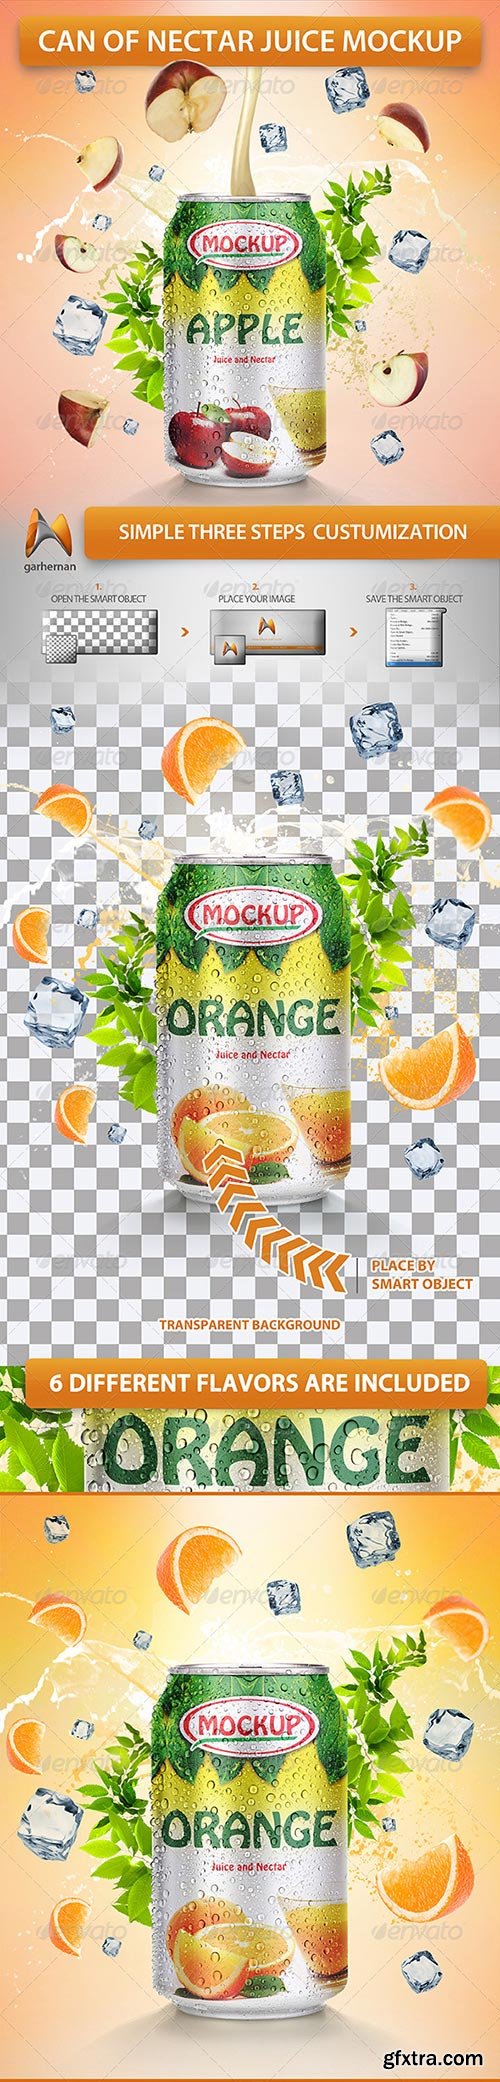 GraphicRiver - Can of Nectar Juice Mockup